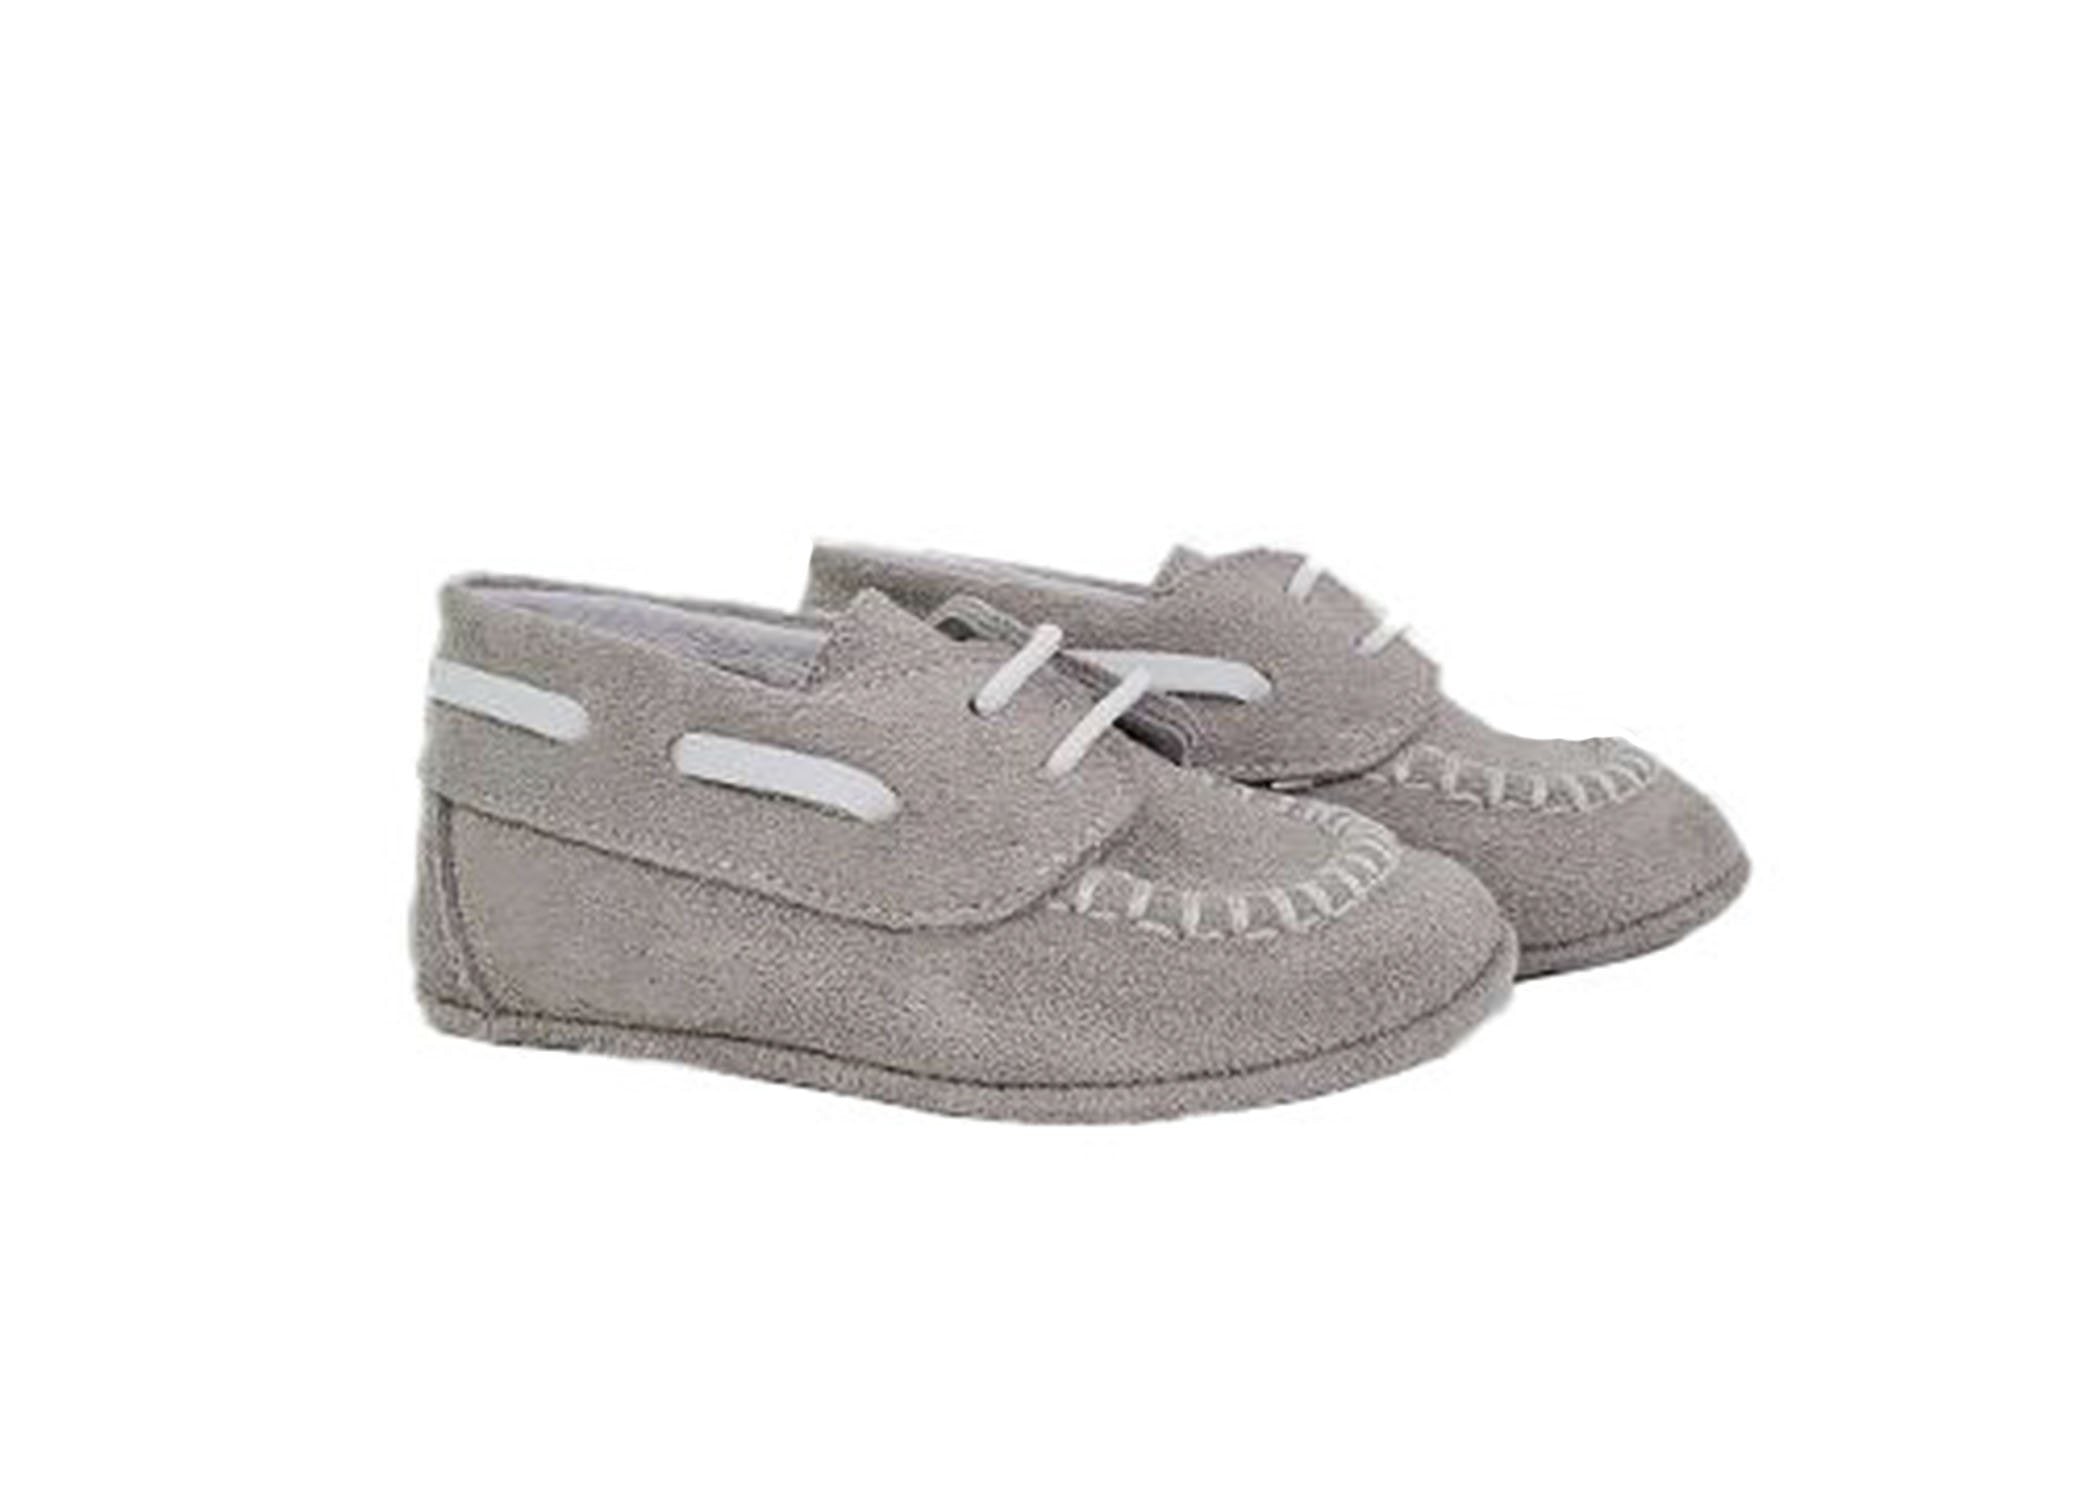 Pearl Suede and Napa White Moc Toe Pre-walker Shoes-Baby Boy Shoes Boys Shoes Alfa Baby Boutique 